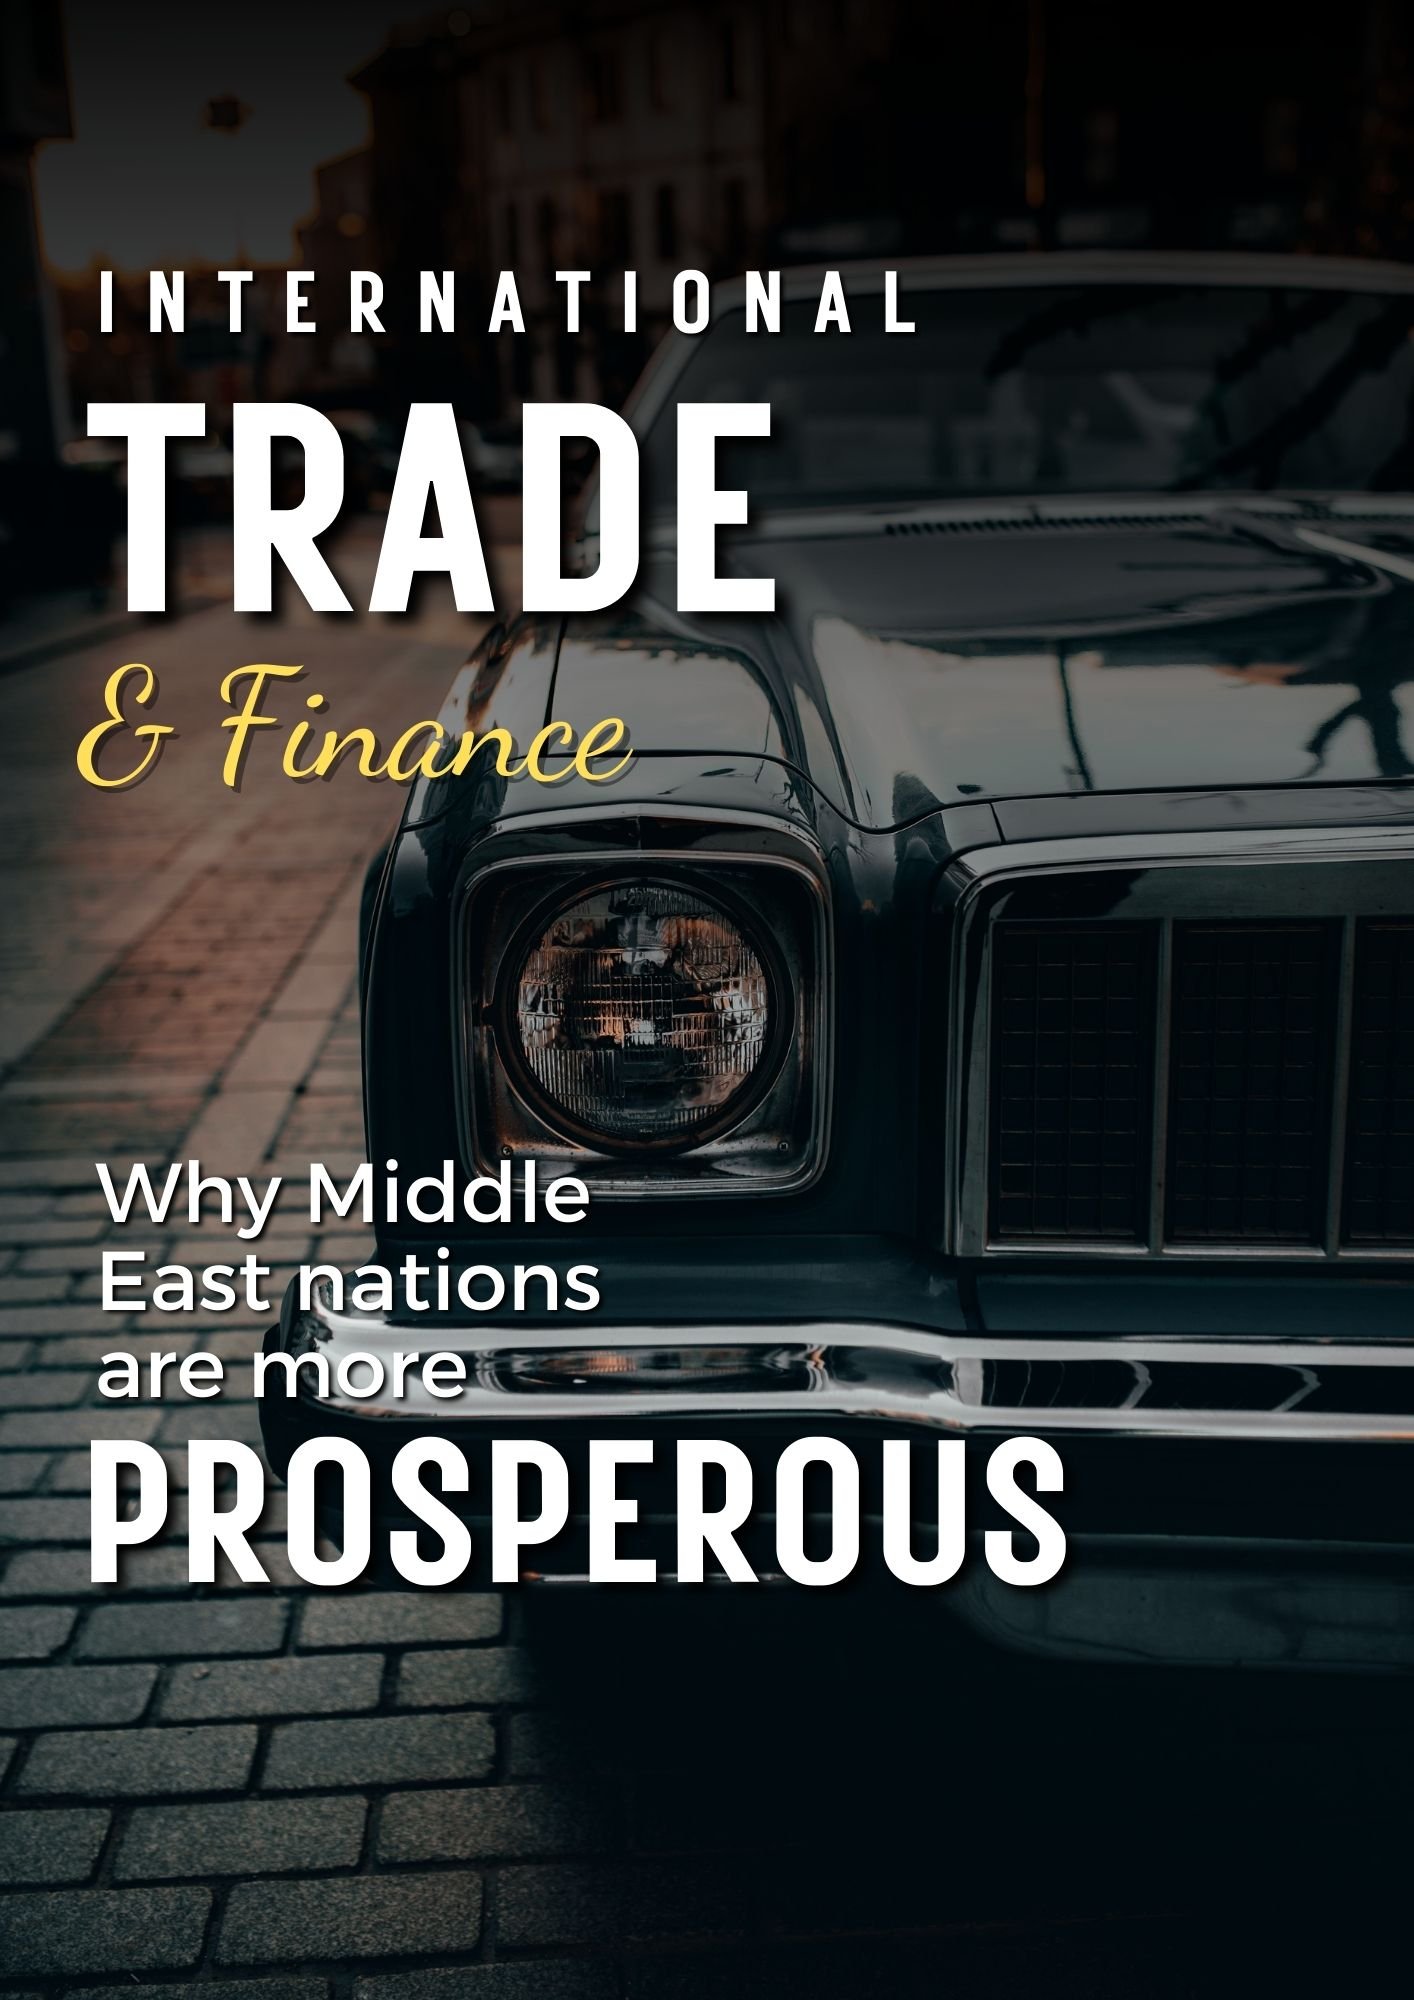 Why middle east nations are more prosperous?